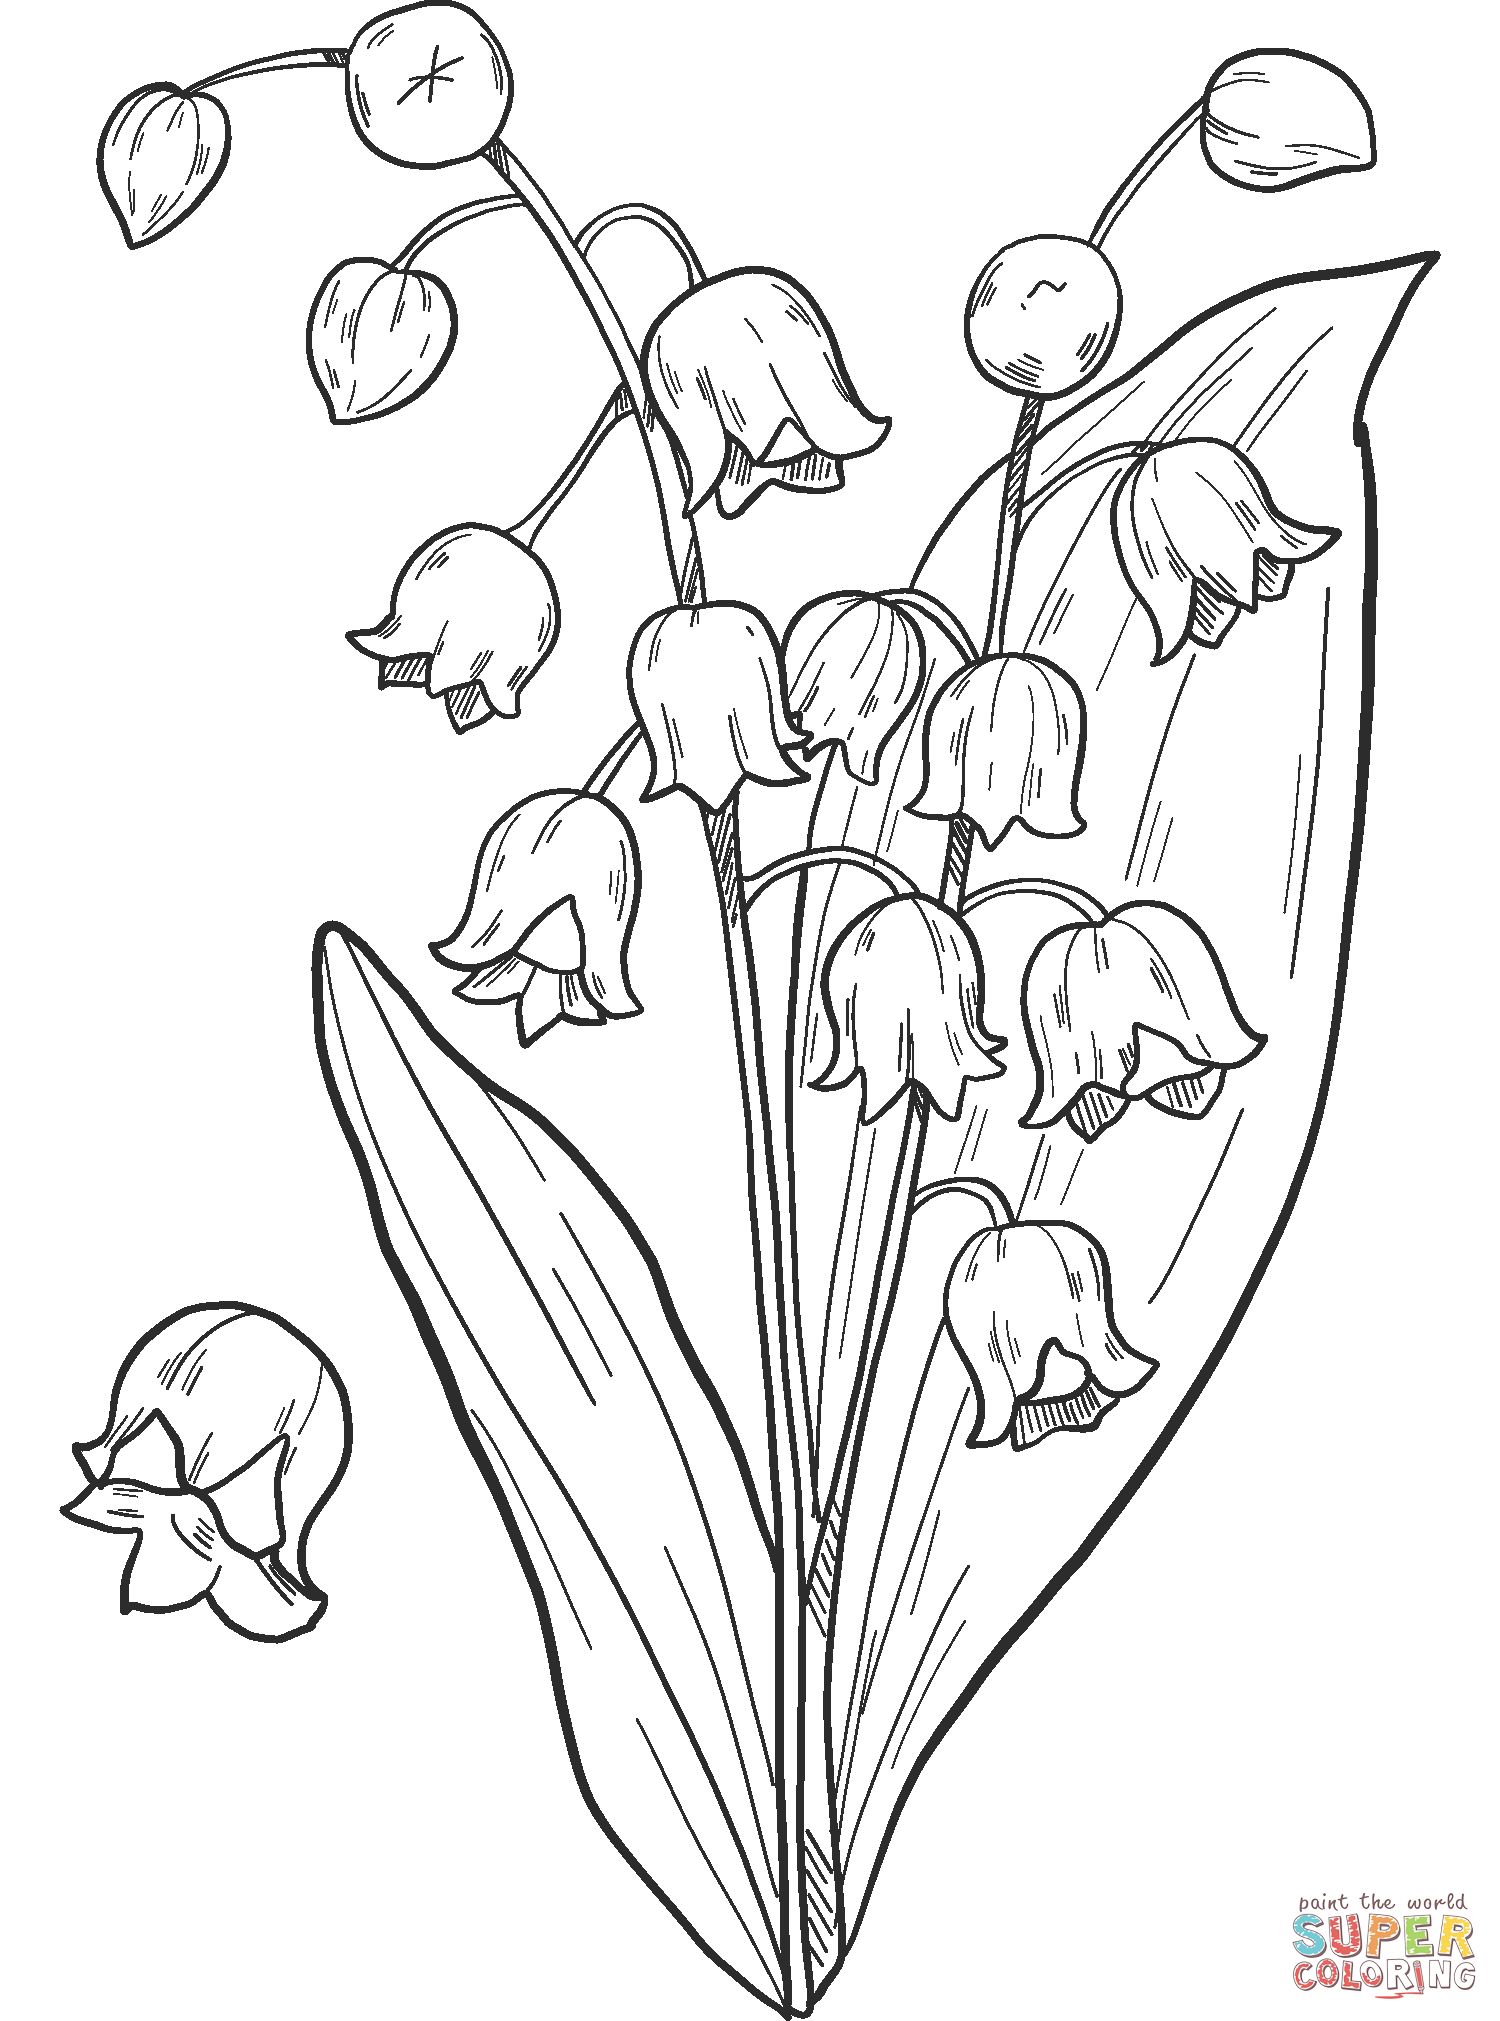 Printable Lily of the Valley Coloring Page